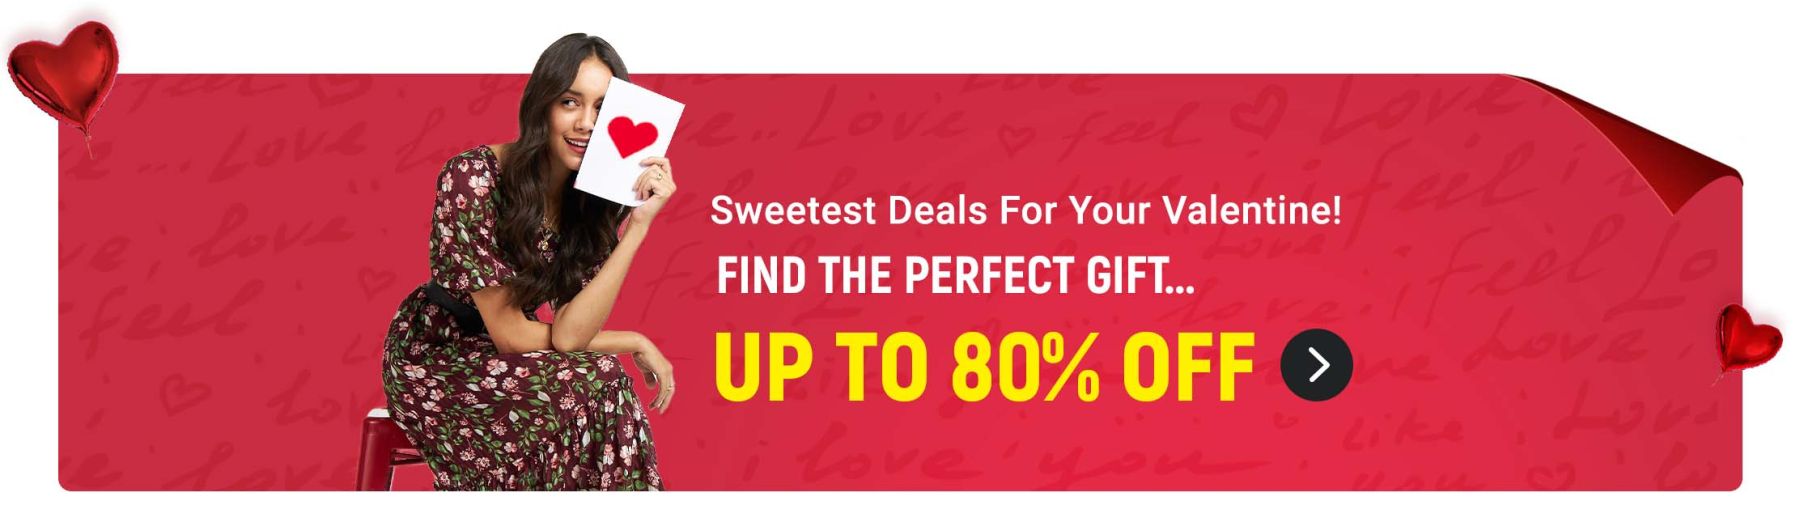 Find the Perfect Gifts for Her on this Valentine popular in india